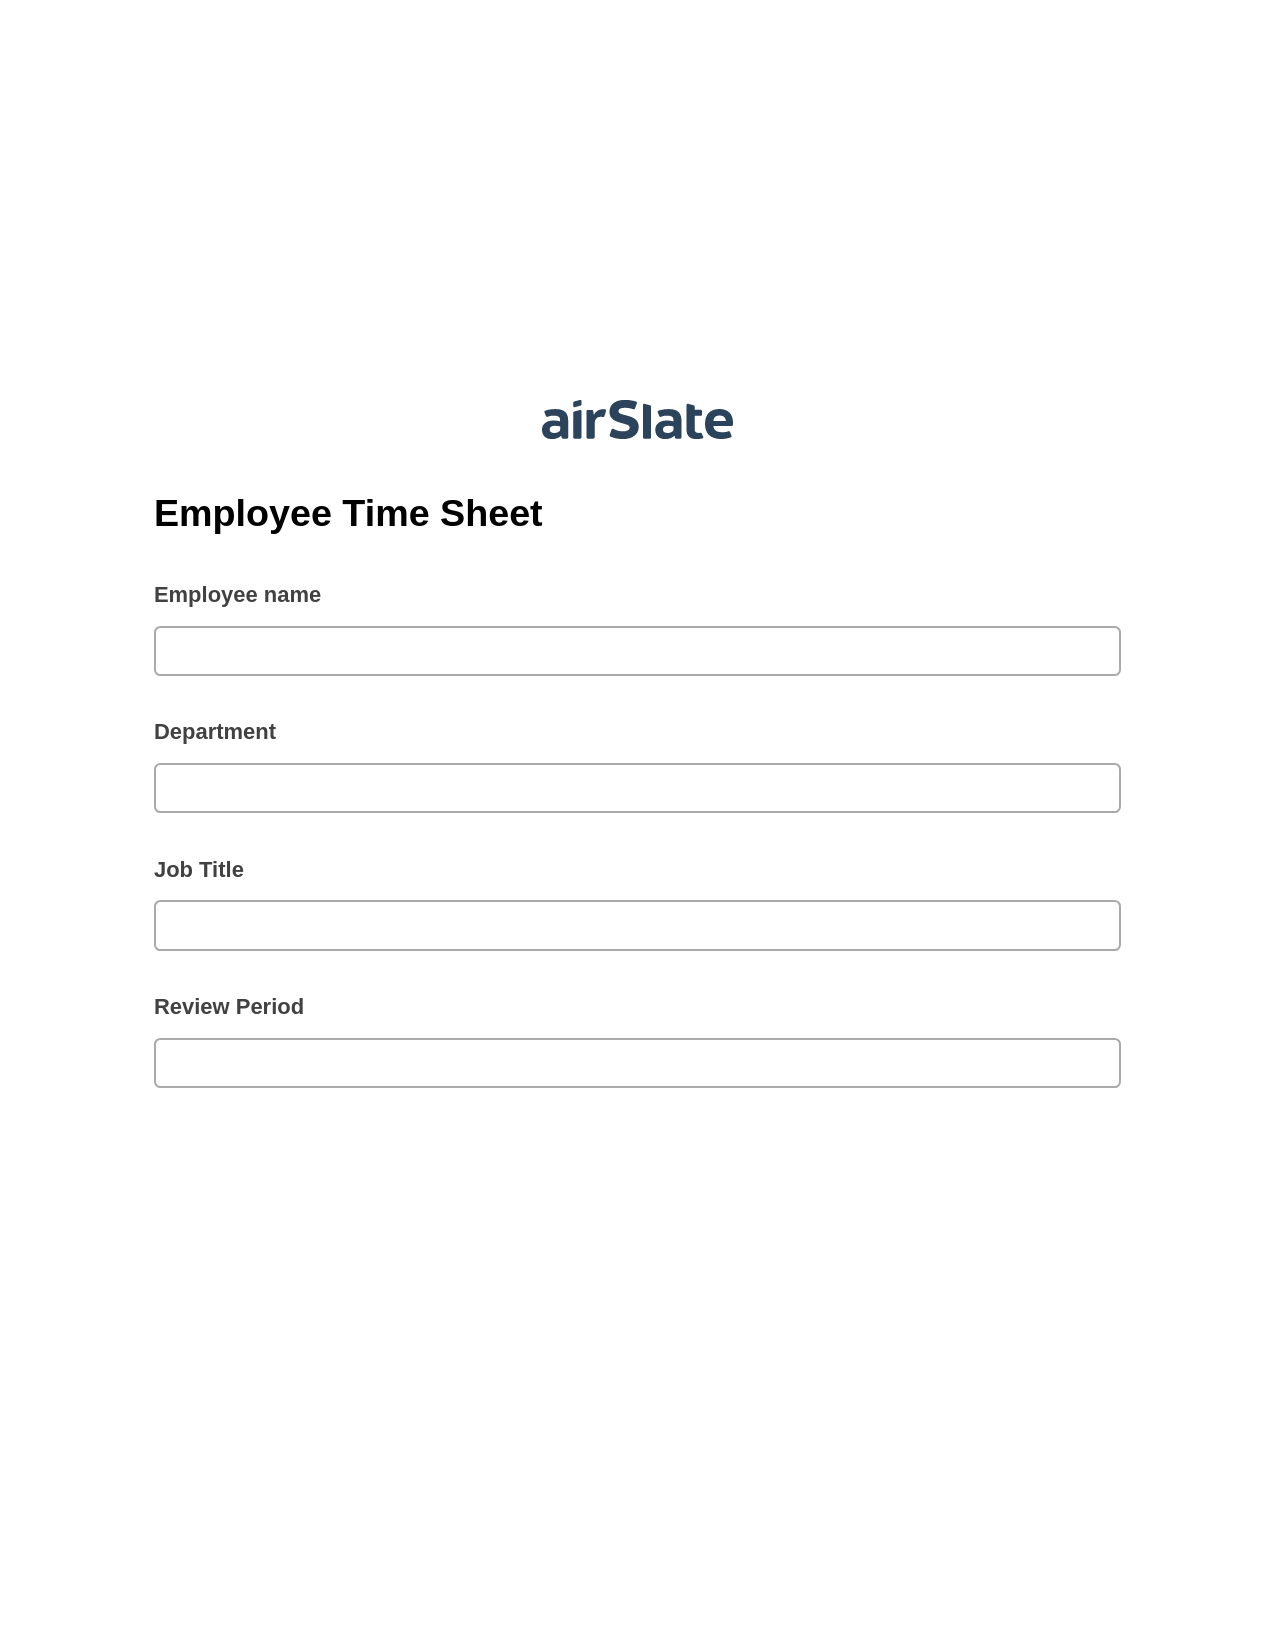 Multirole Employee Time Sheet Prefill from NetSuite records, Create Salesforce Records Bot, Export to Google Sheet Bot